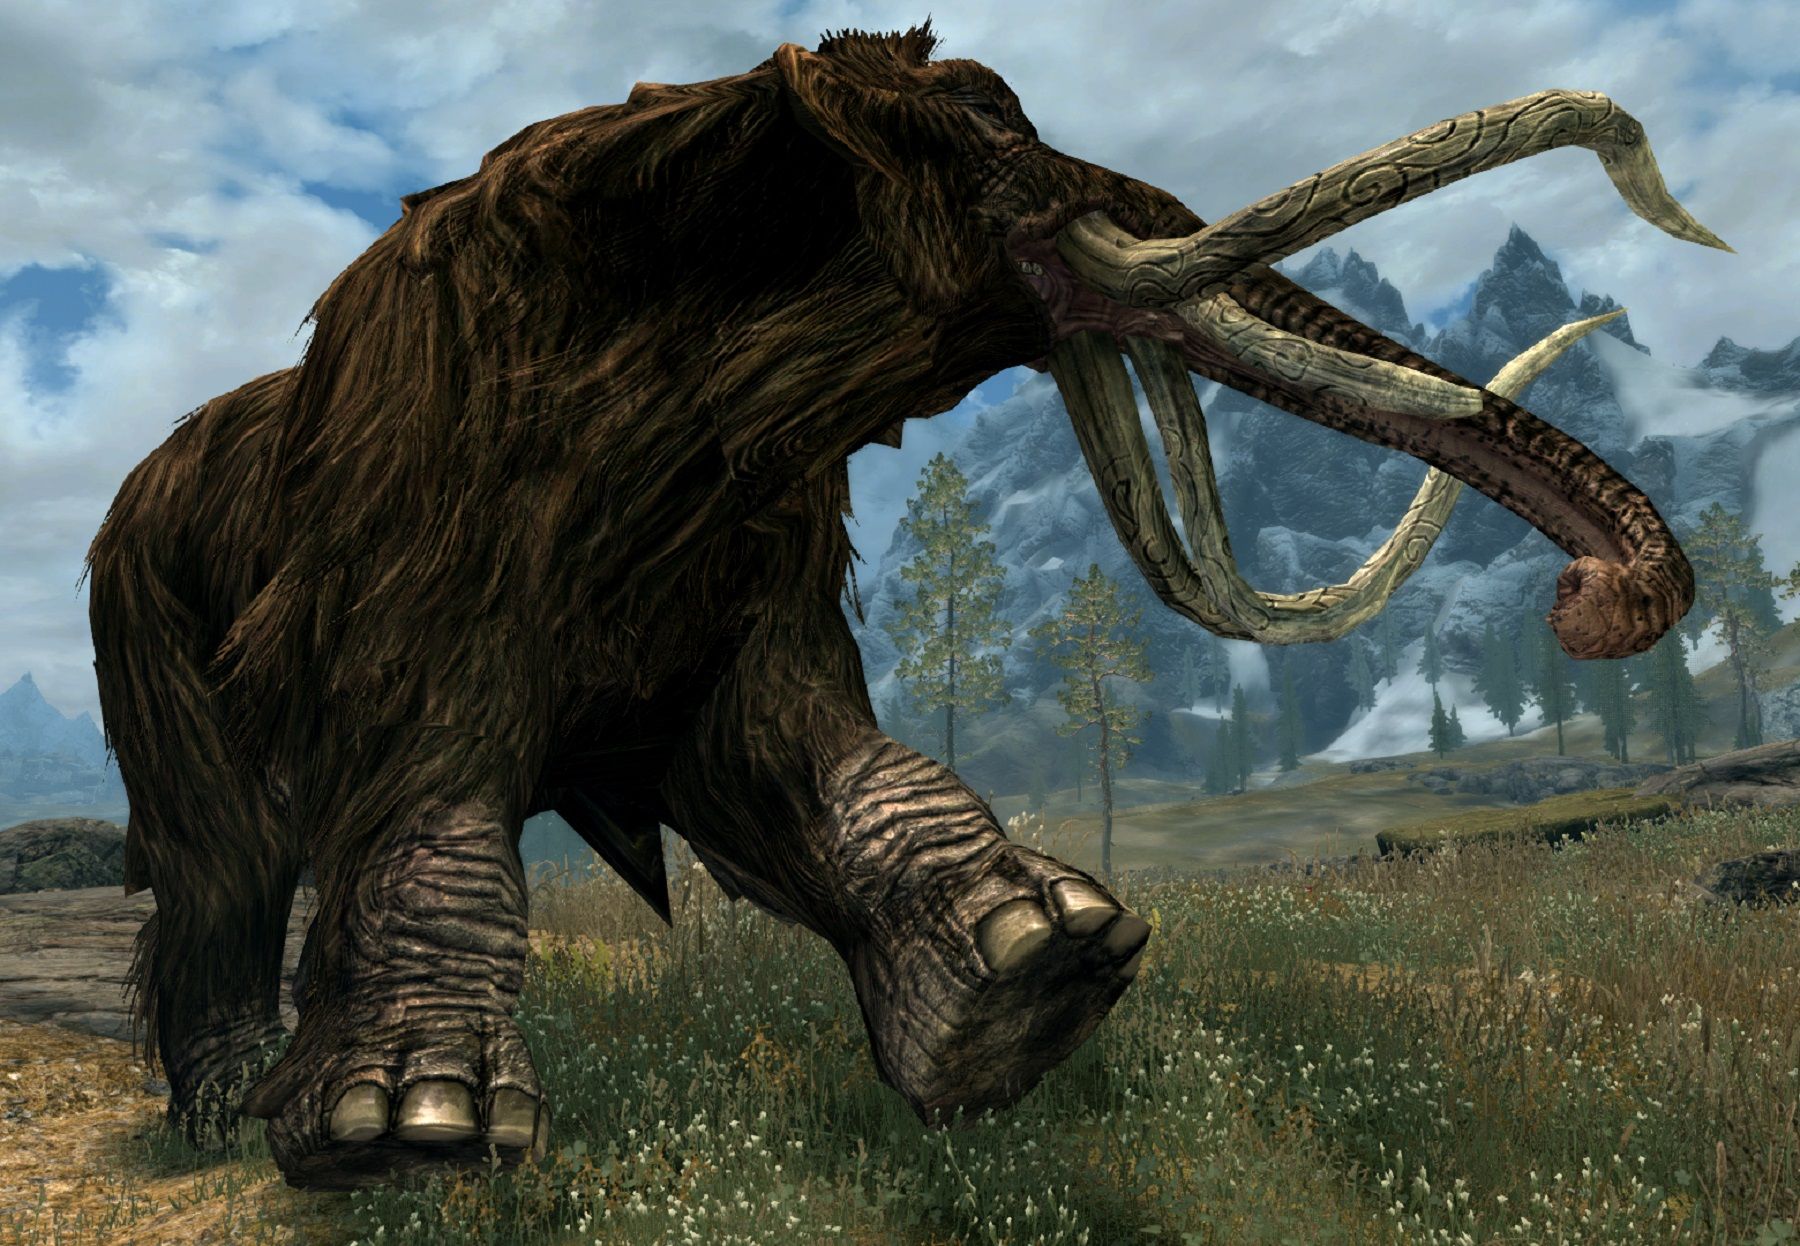 Image from The Elder Scrolls 5: Skyrim showing a mammoth in 4K resolution.